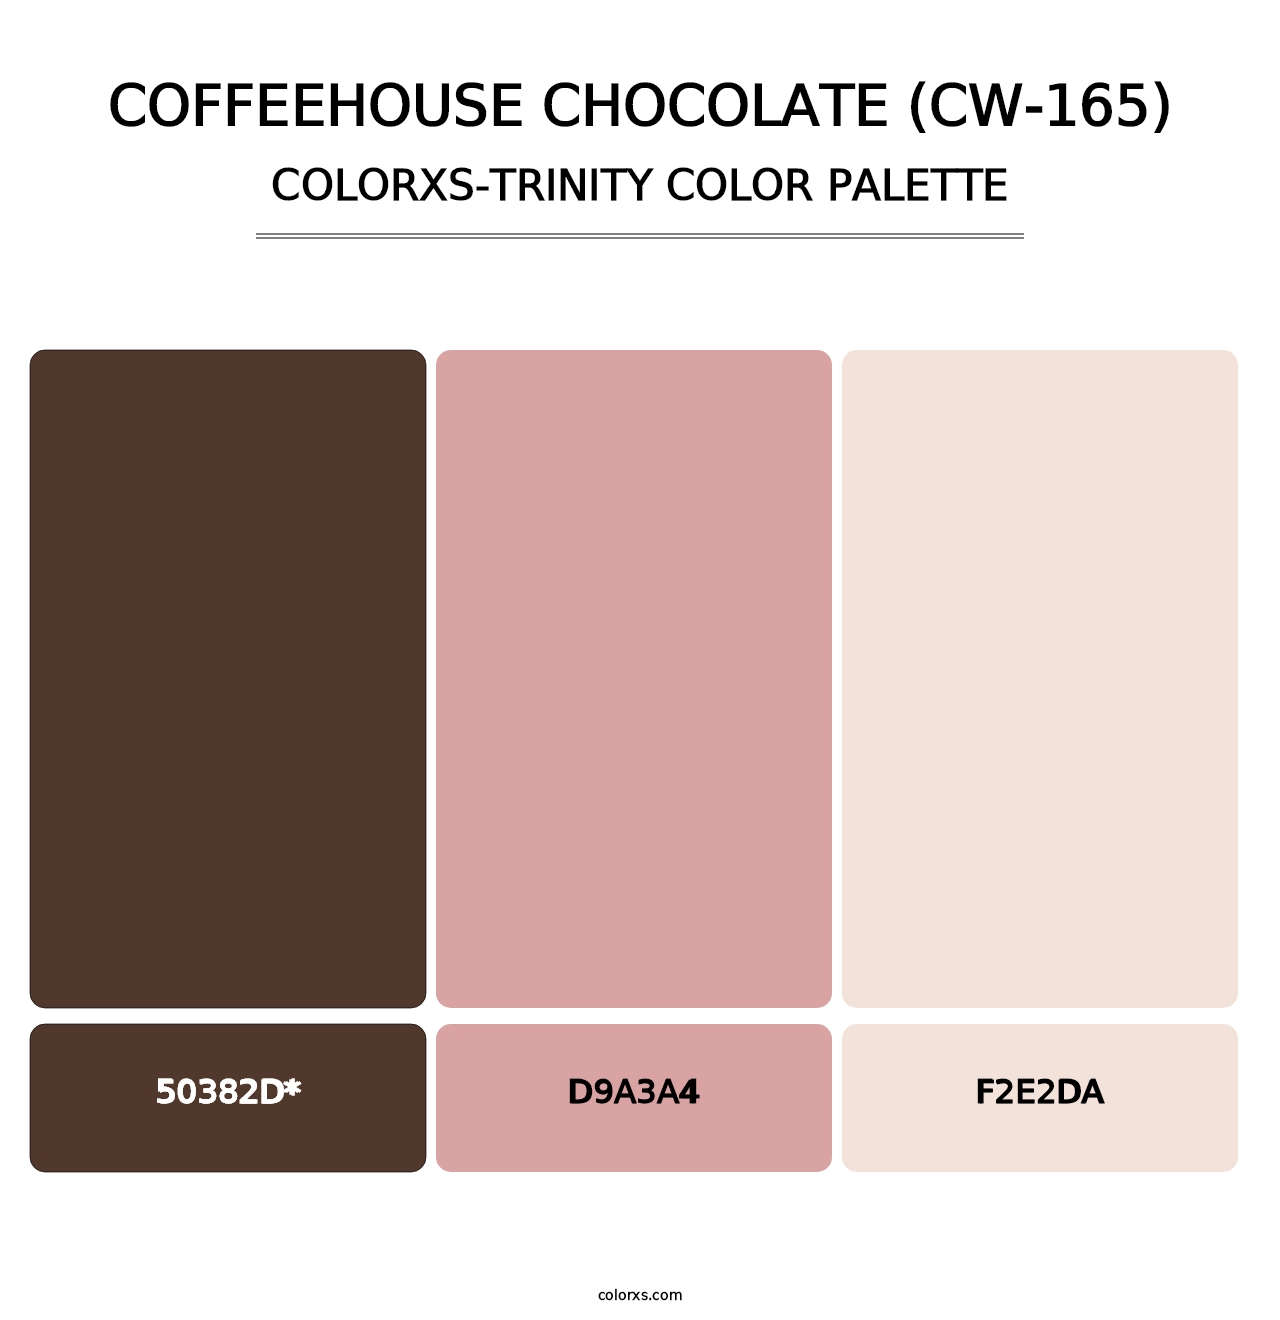 Coffeehouse Chocolate (CW-165) - Colorxs Trinity Palette